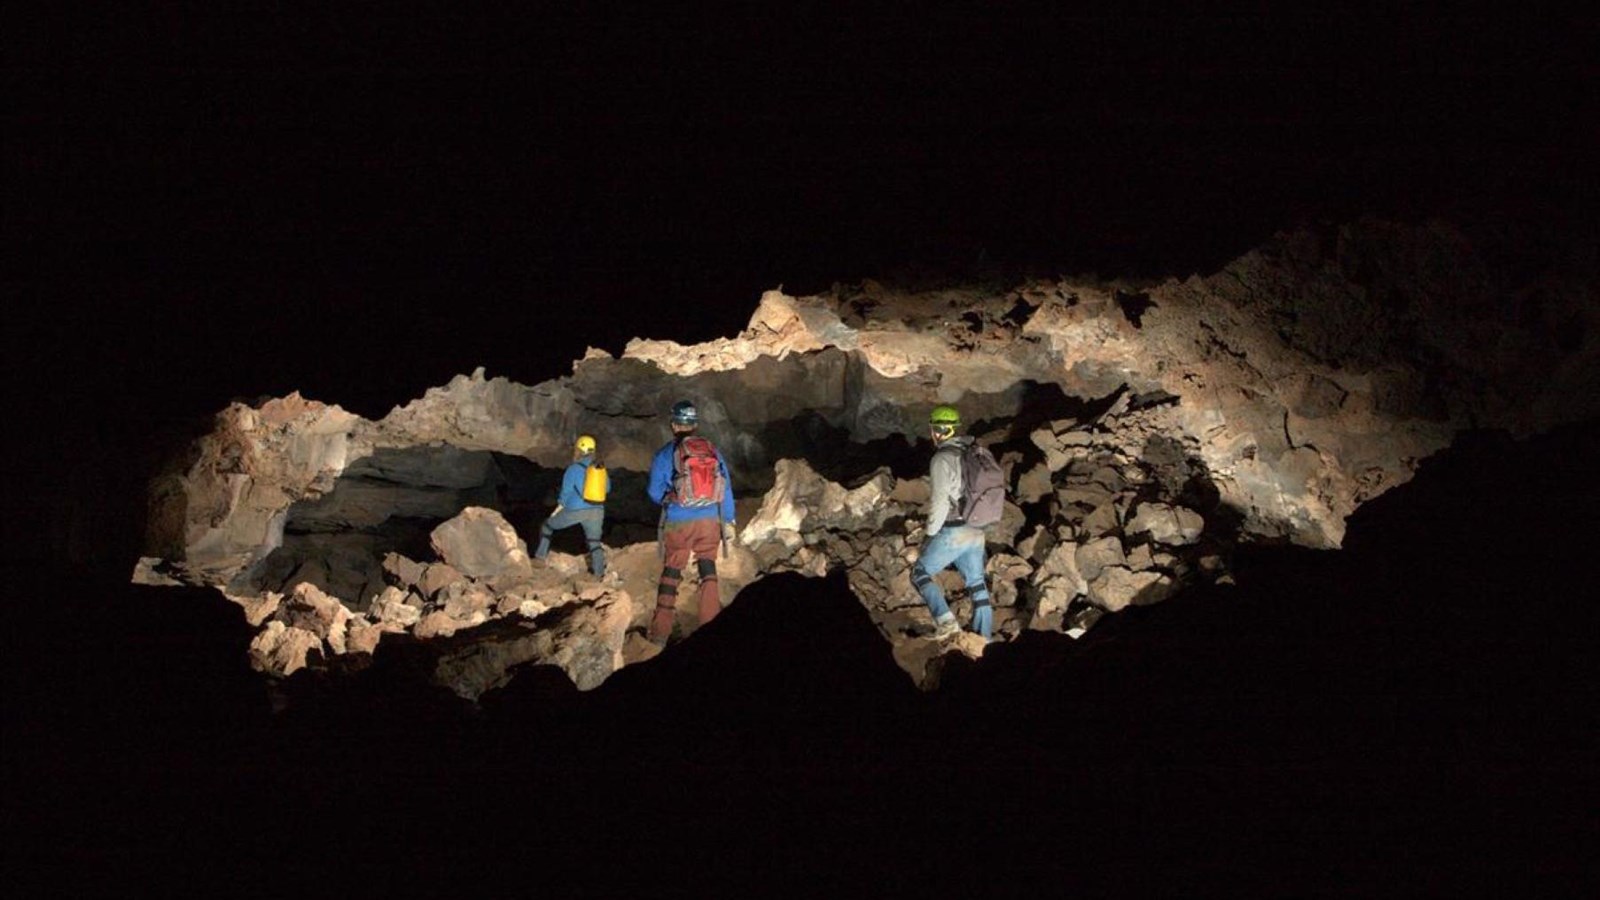 Cavers walk over boulders and rubble in a dark lava tube cave